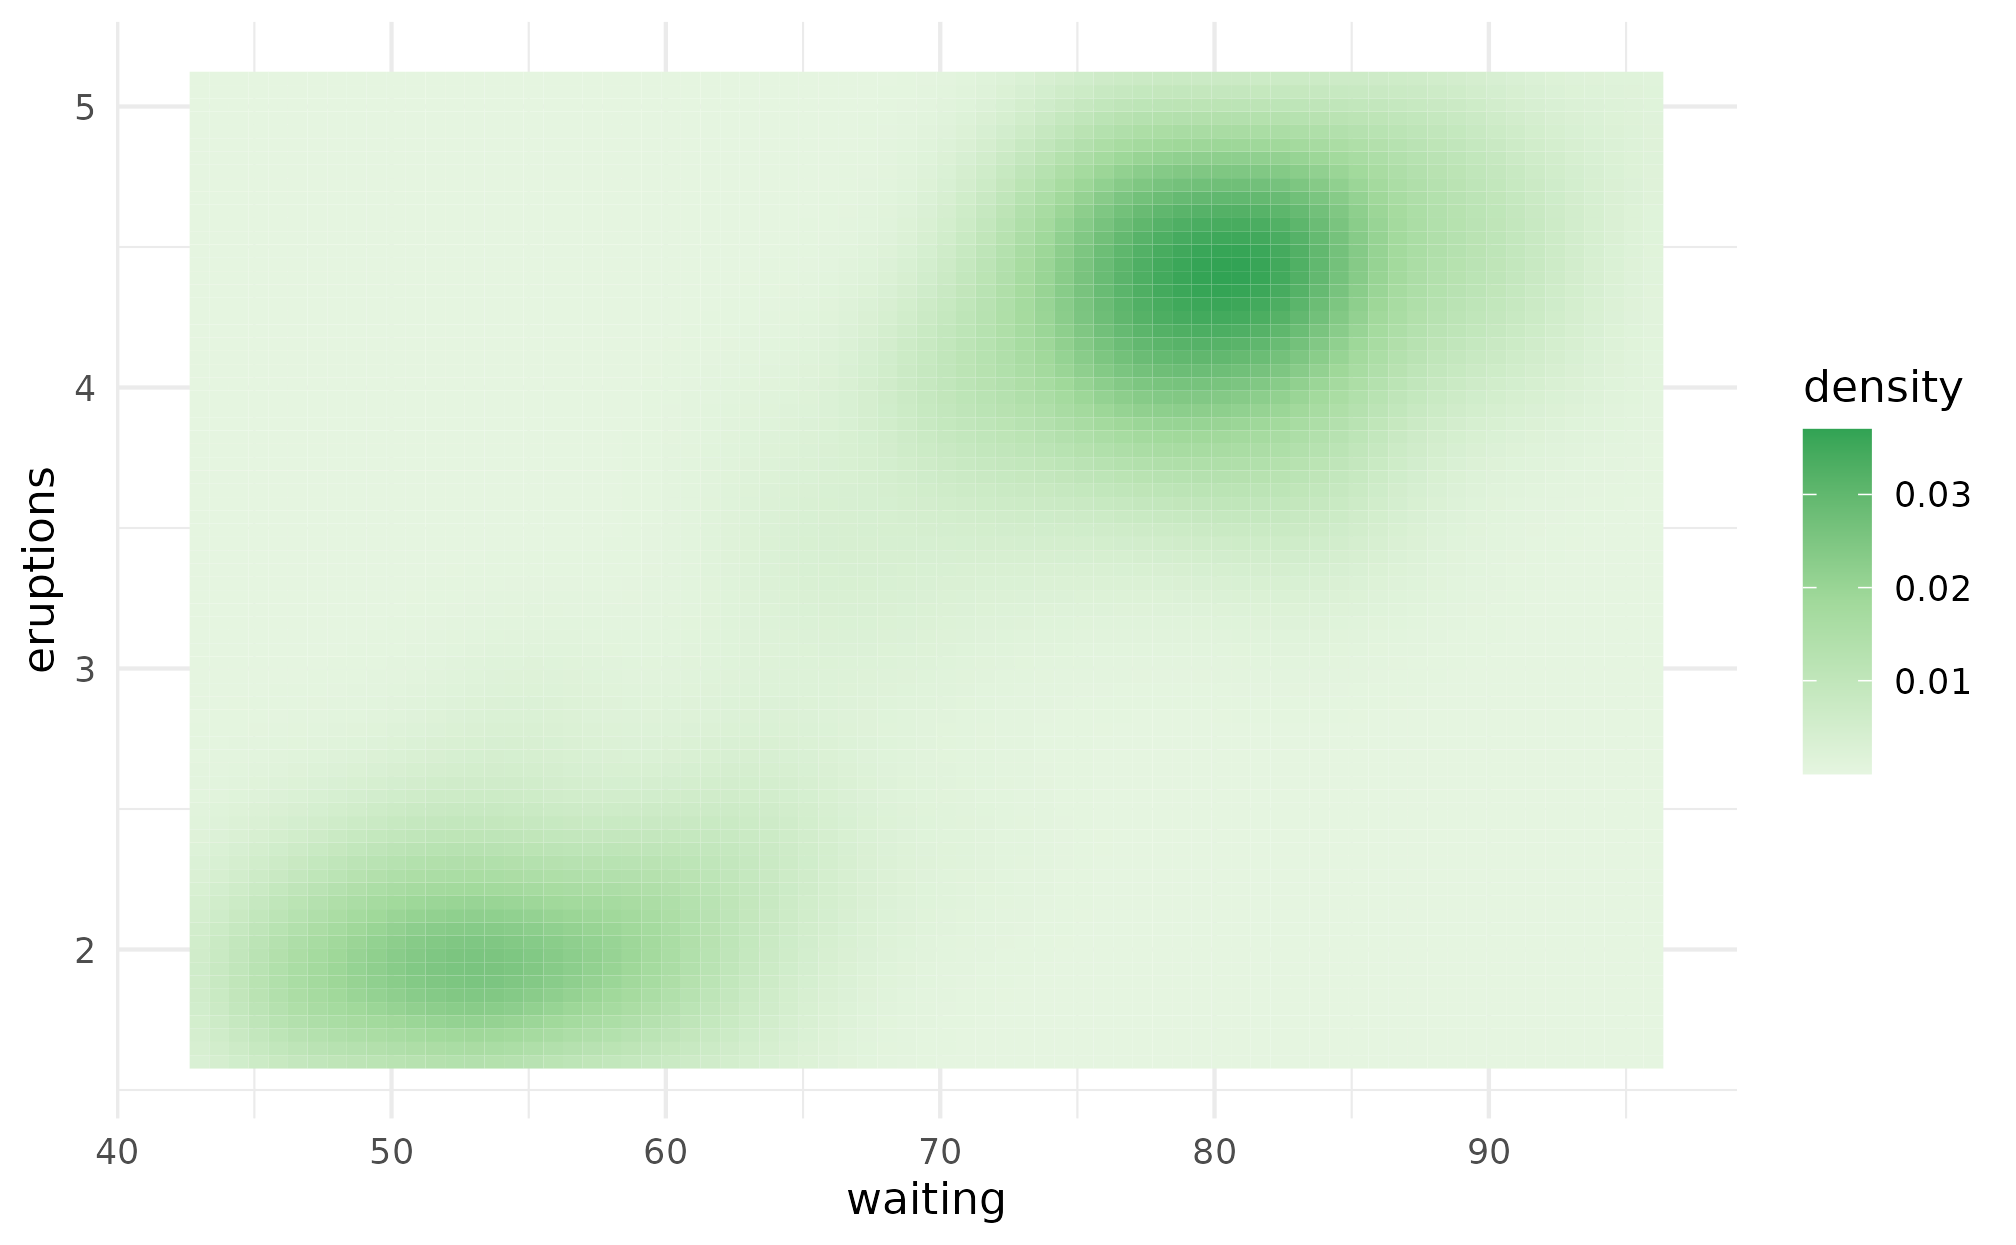 The same heatmap as the previous figure, but instead of the fill using a palette based on Fearless (Taylor's Version), the color palette goes from light green to dark green.